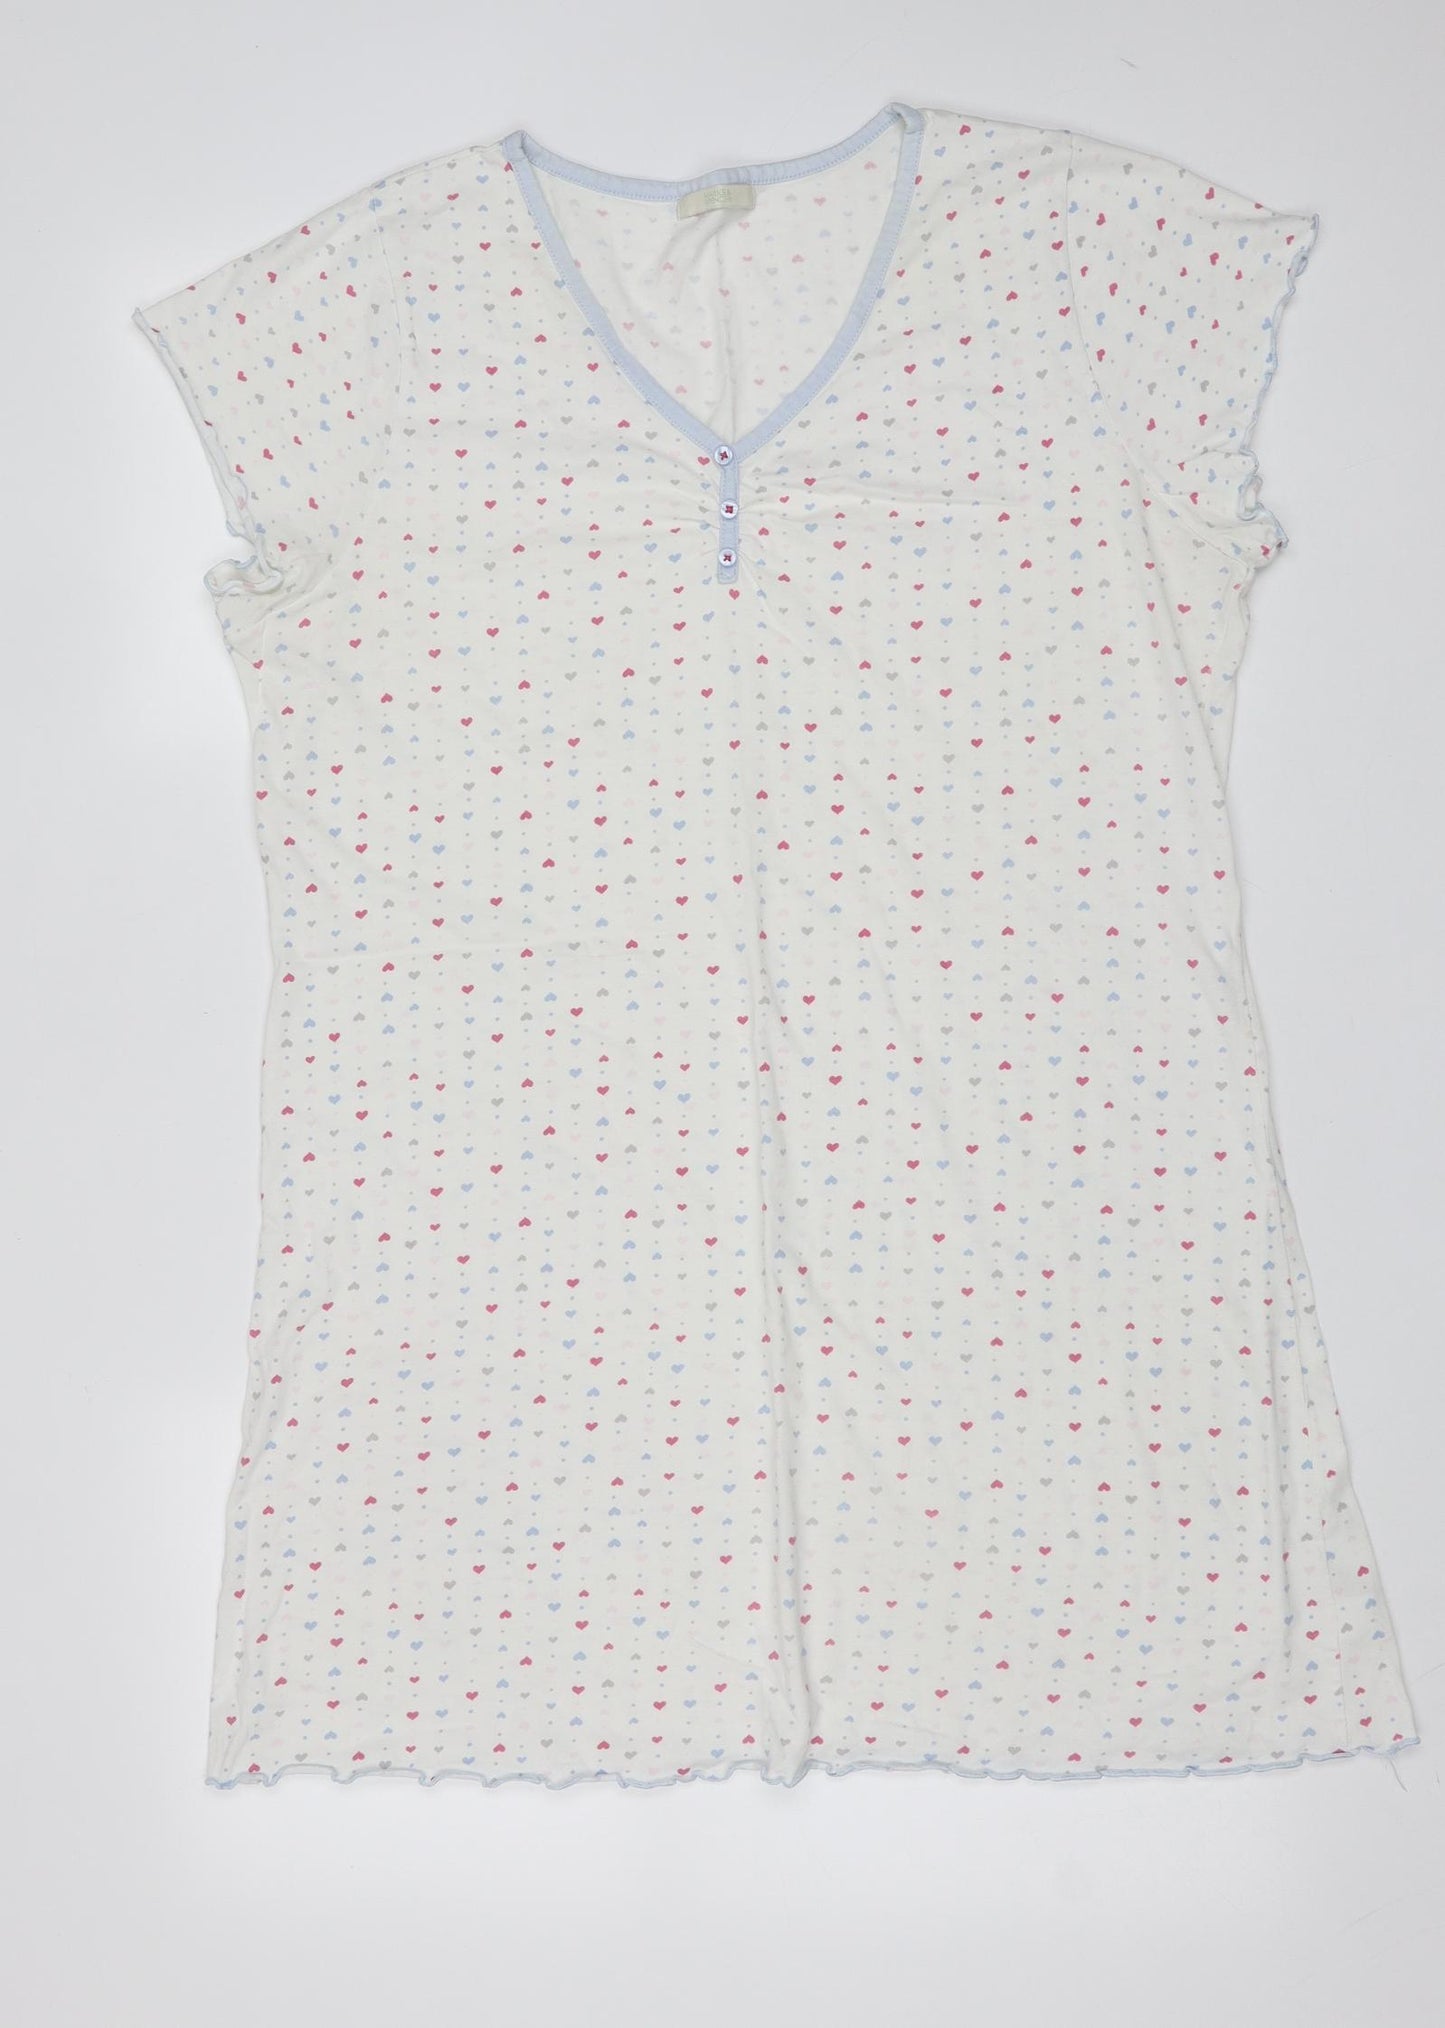 Marks and Spencer Womens White Solid Cotton Top Nightshirt Size 16   - heart pattern